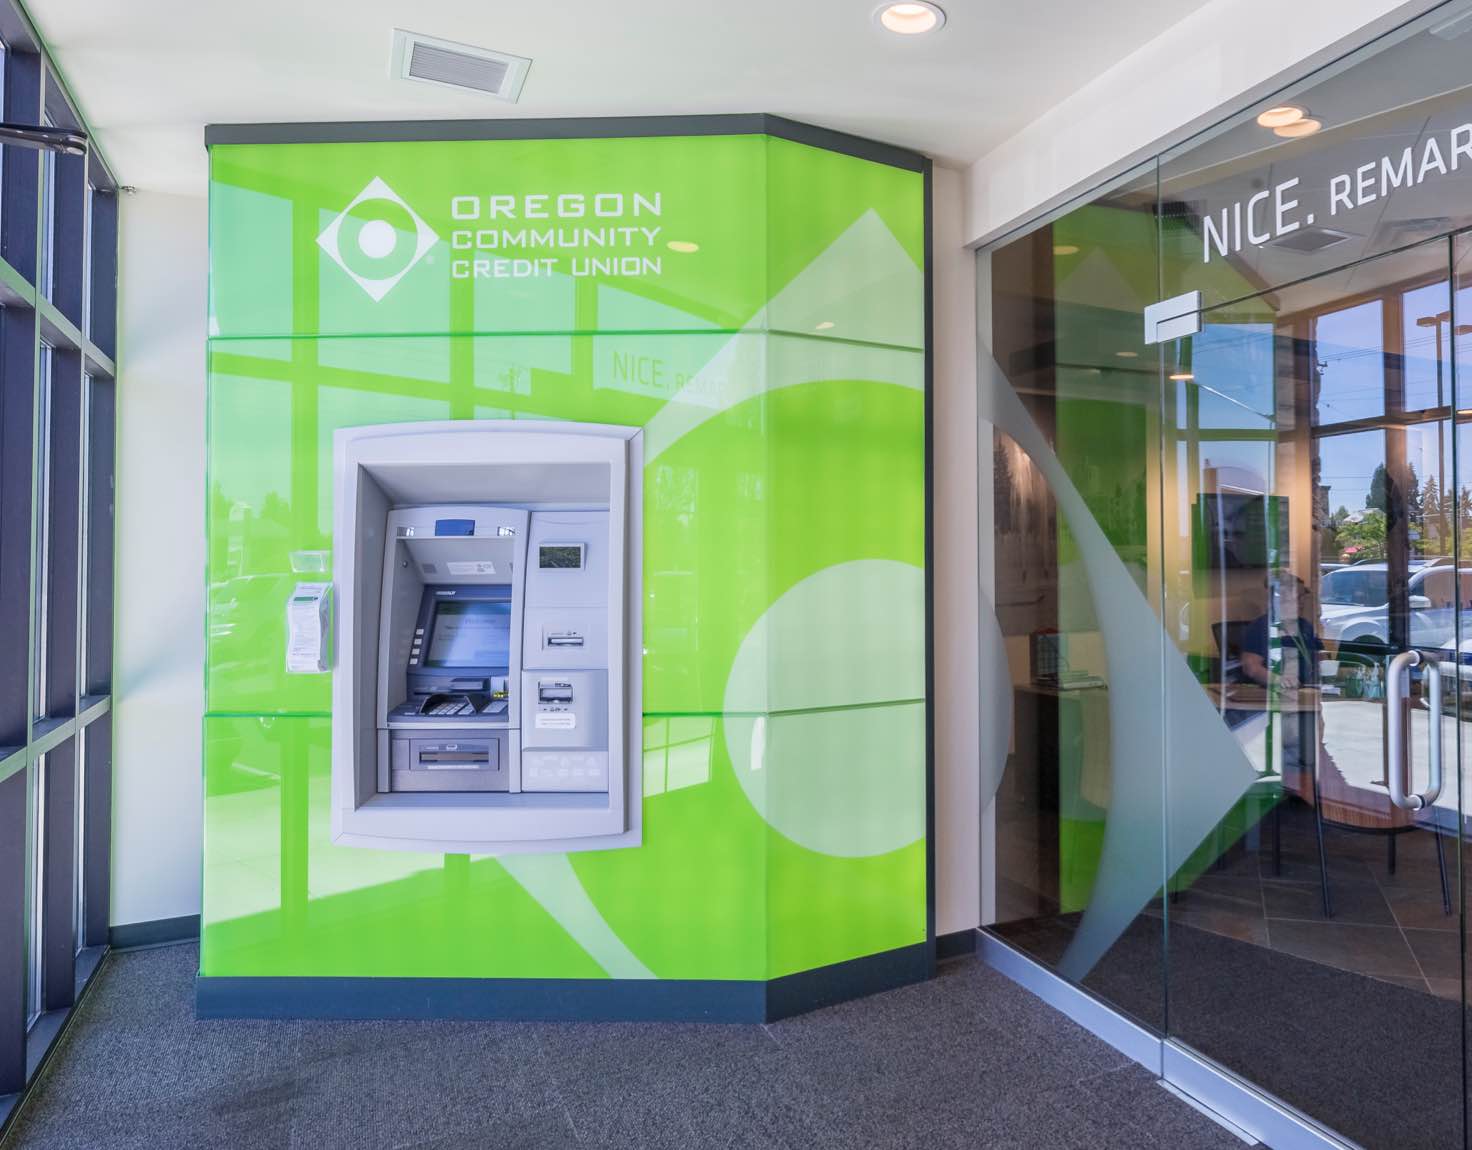 A green ATM in a bank entrance way.